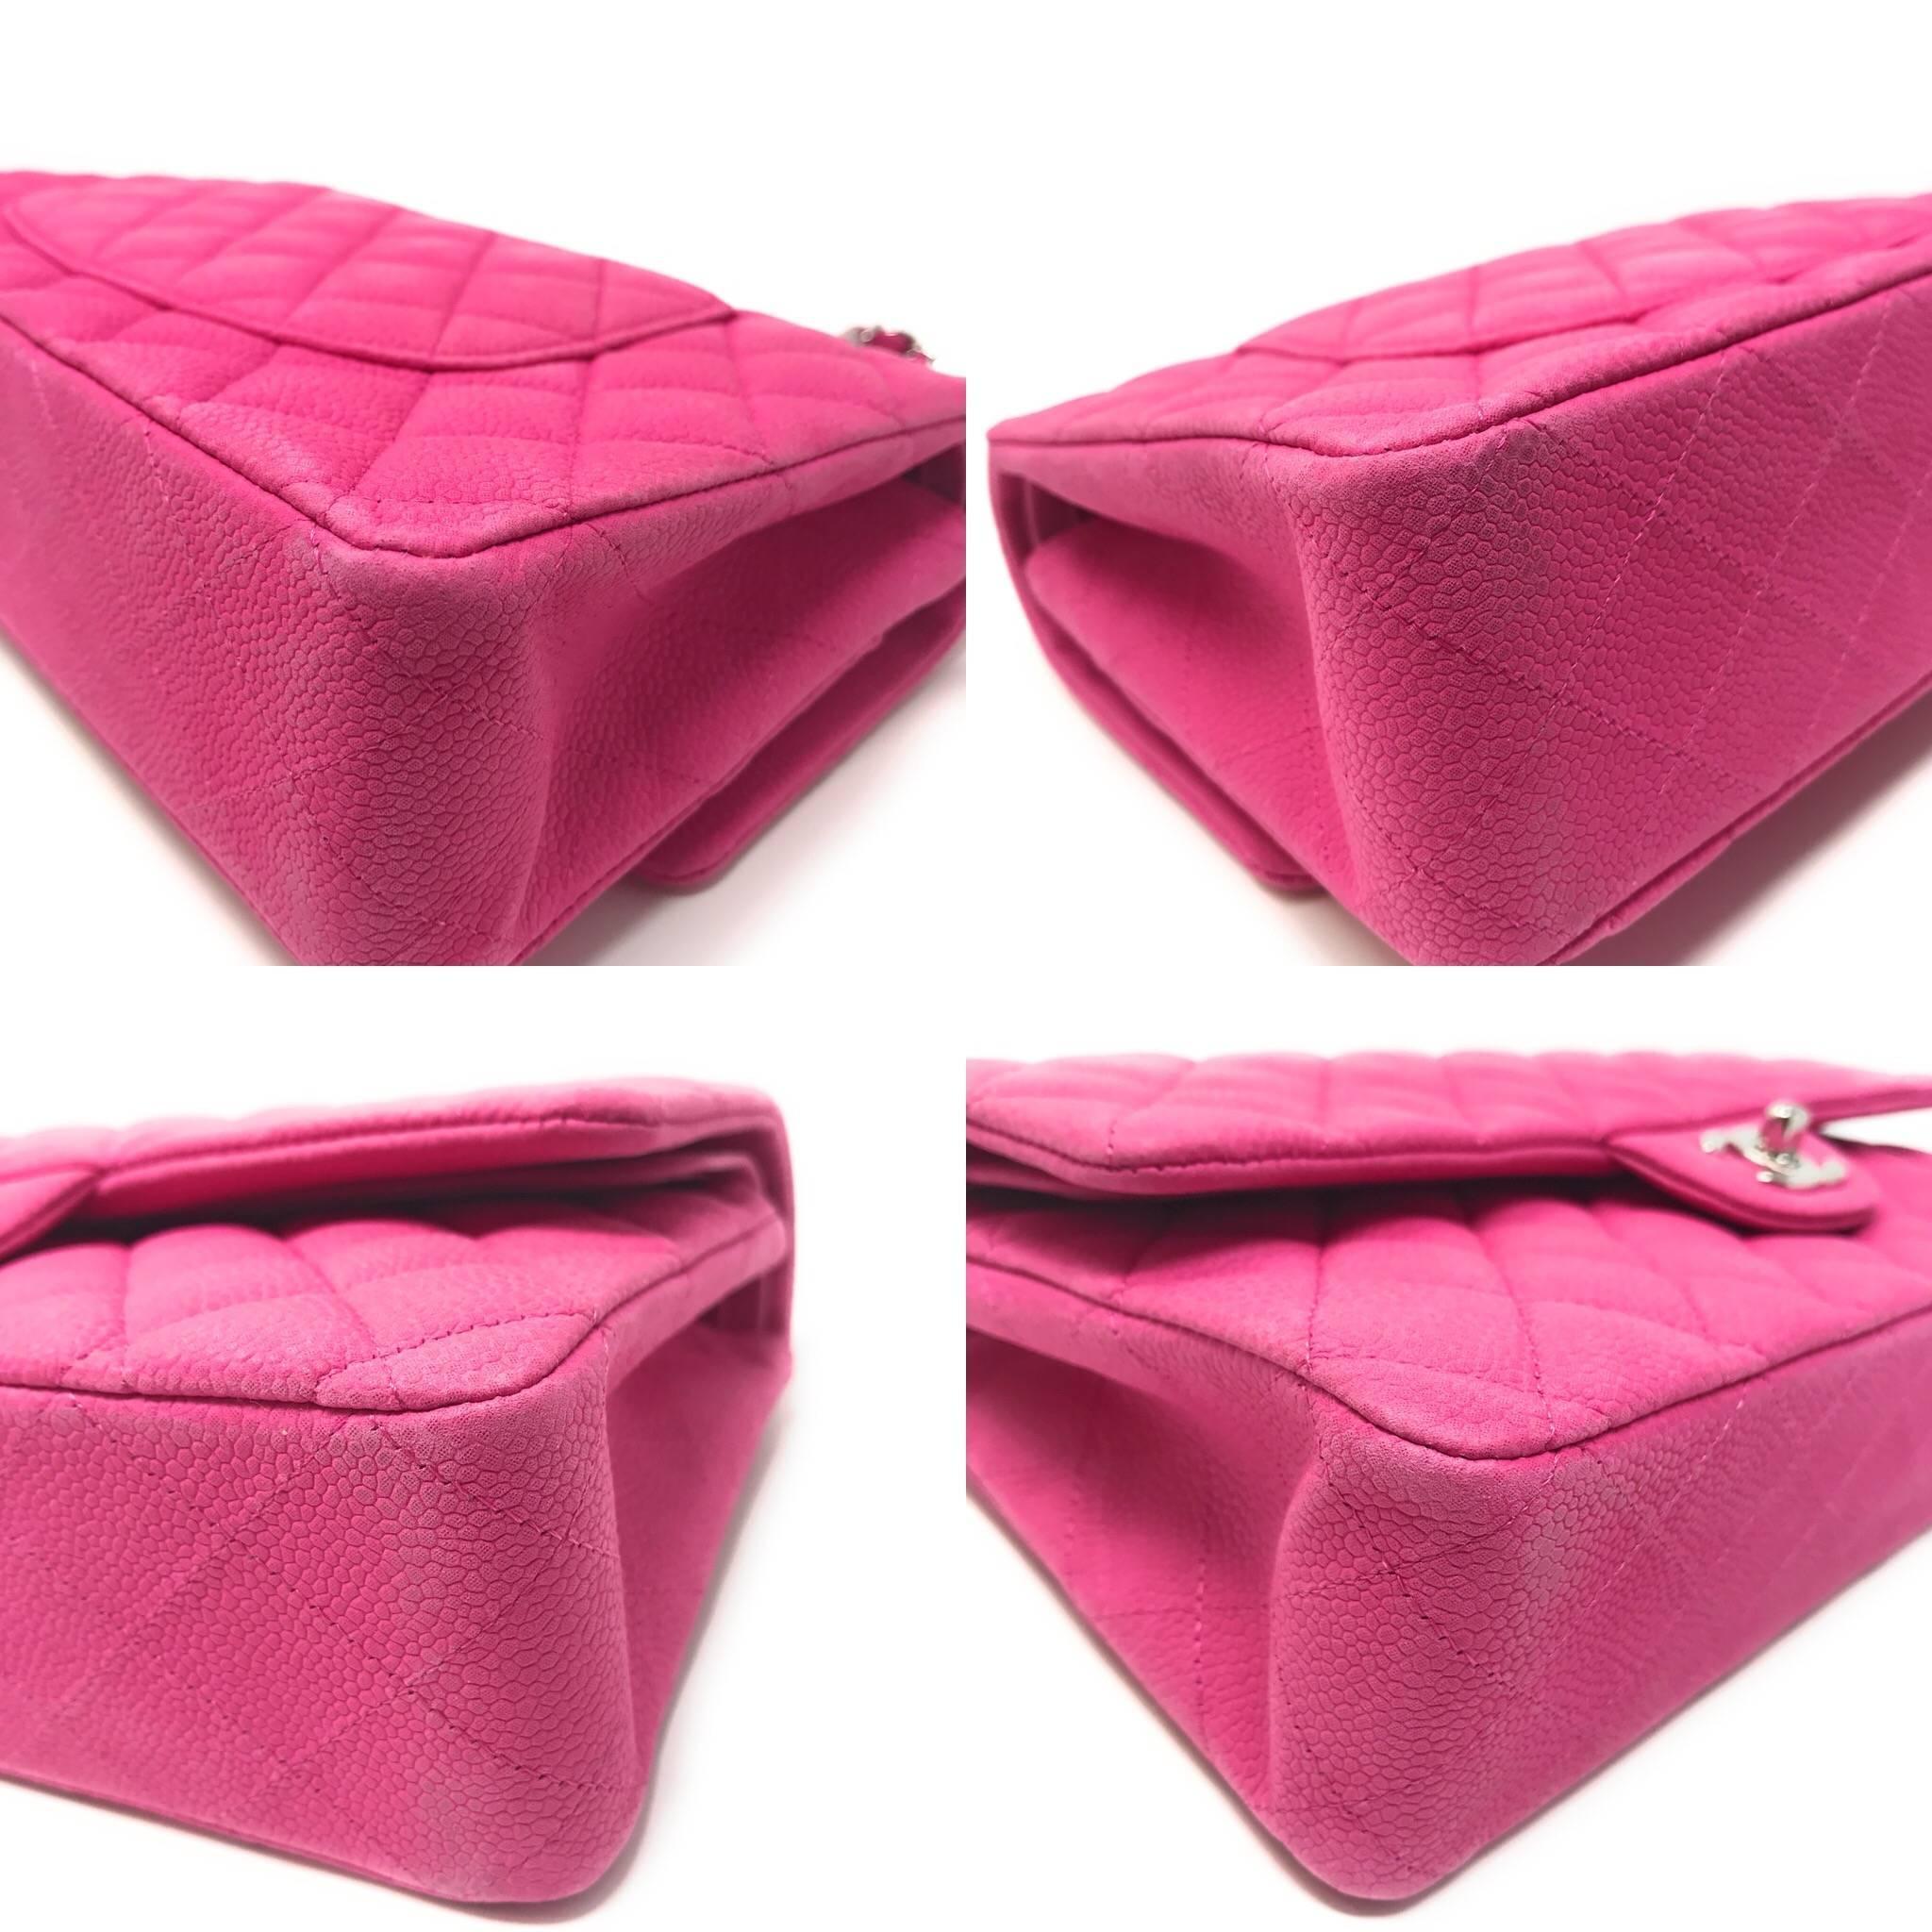 CHANEL, Bags, Chanel Double Flap Hot Pink Matte Caviar Leather